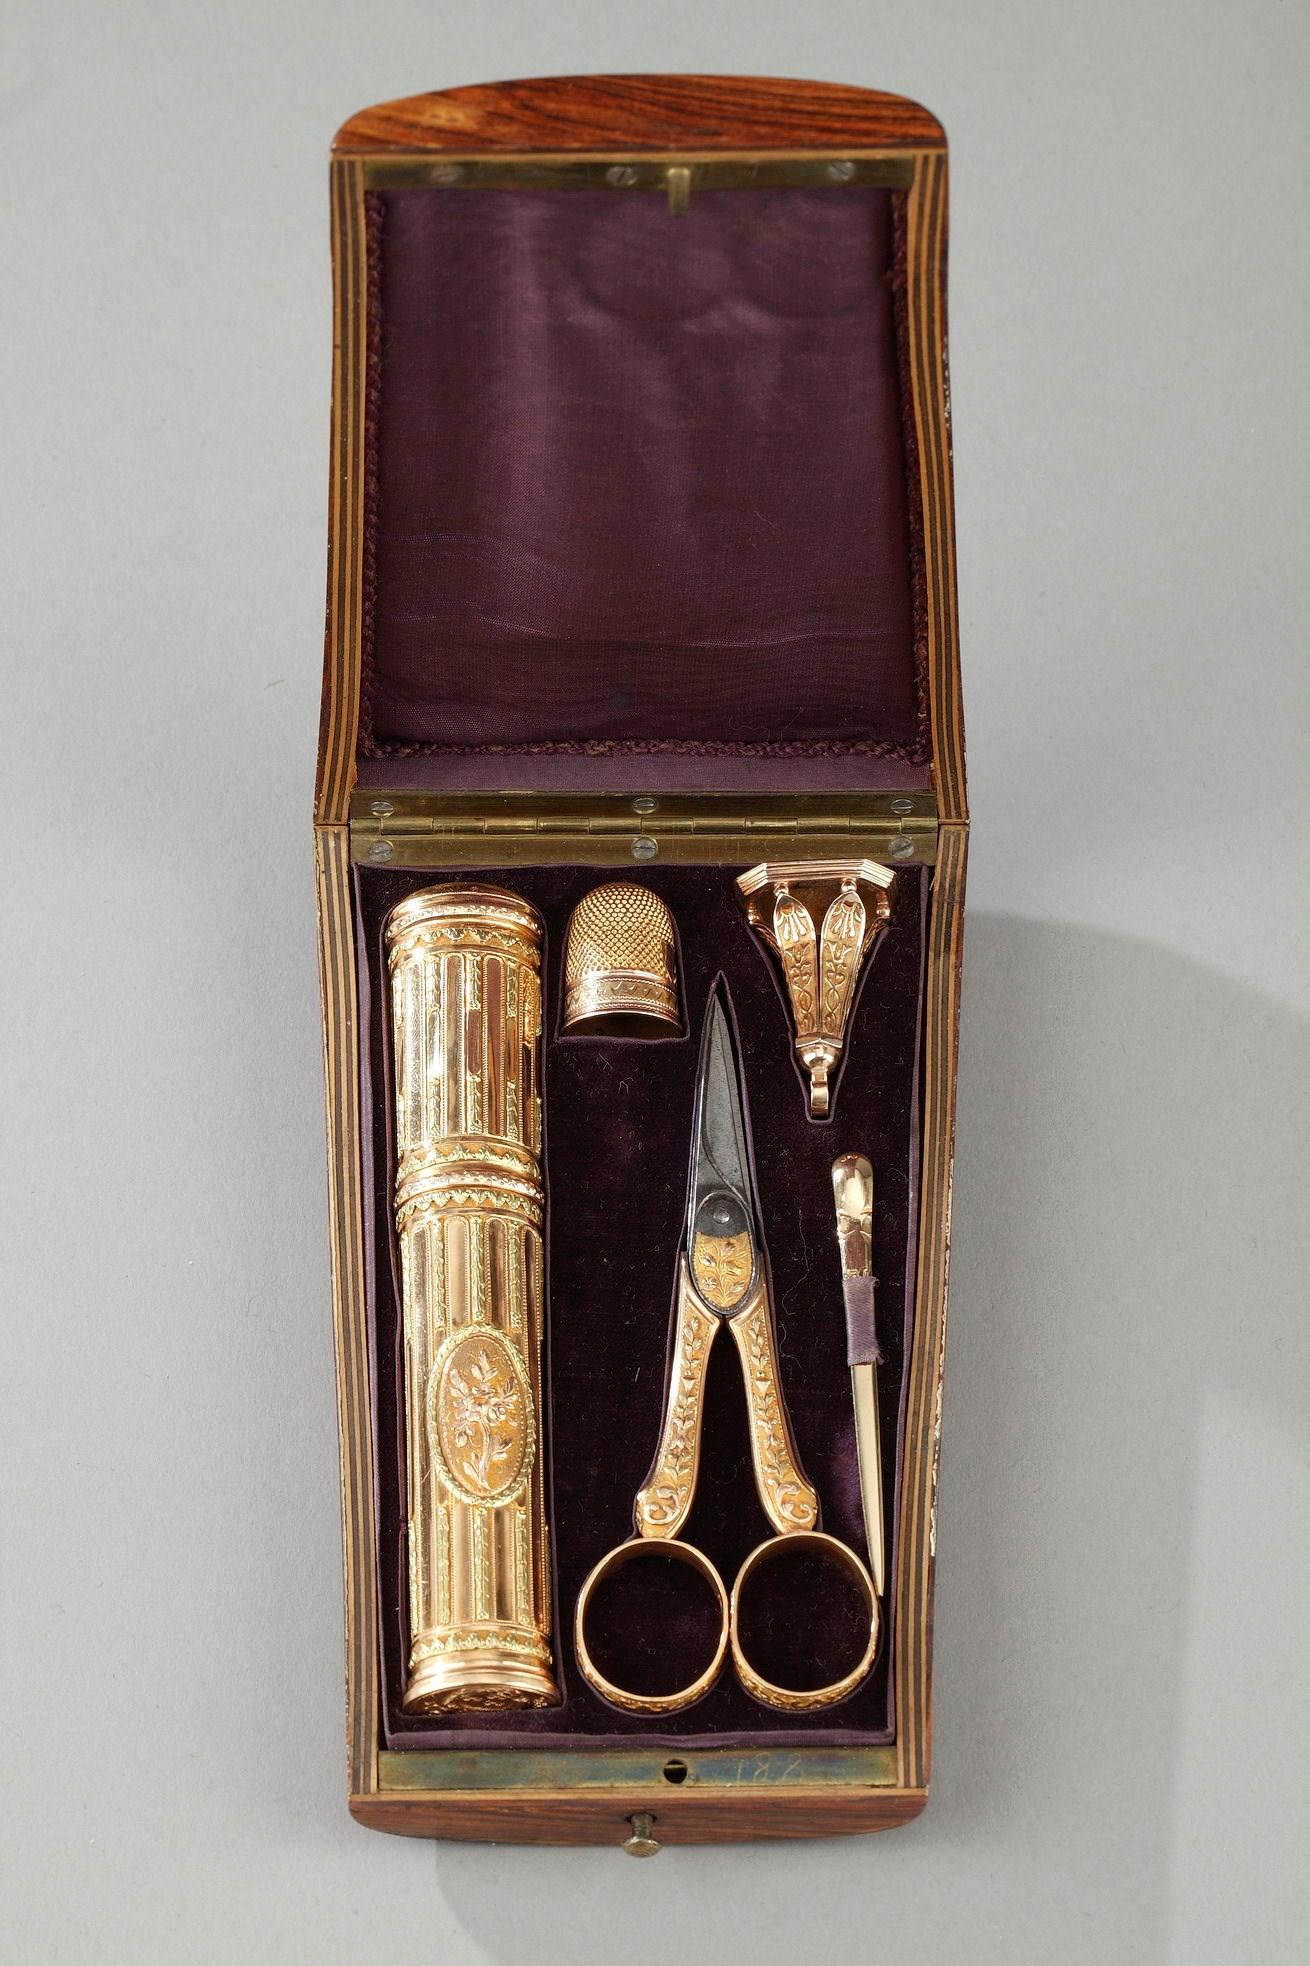 A 18th century set presented in trapezoidal case made of light wood and inlaid with marquetry. The vanity case includes a gold wax case decorated with flutes, a dice and a wool needle, a gold seal and a pair of gold and steel scissors. The Louis XVI